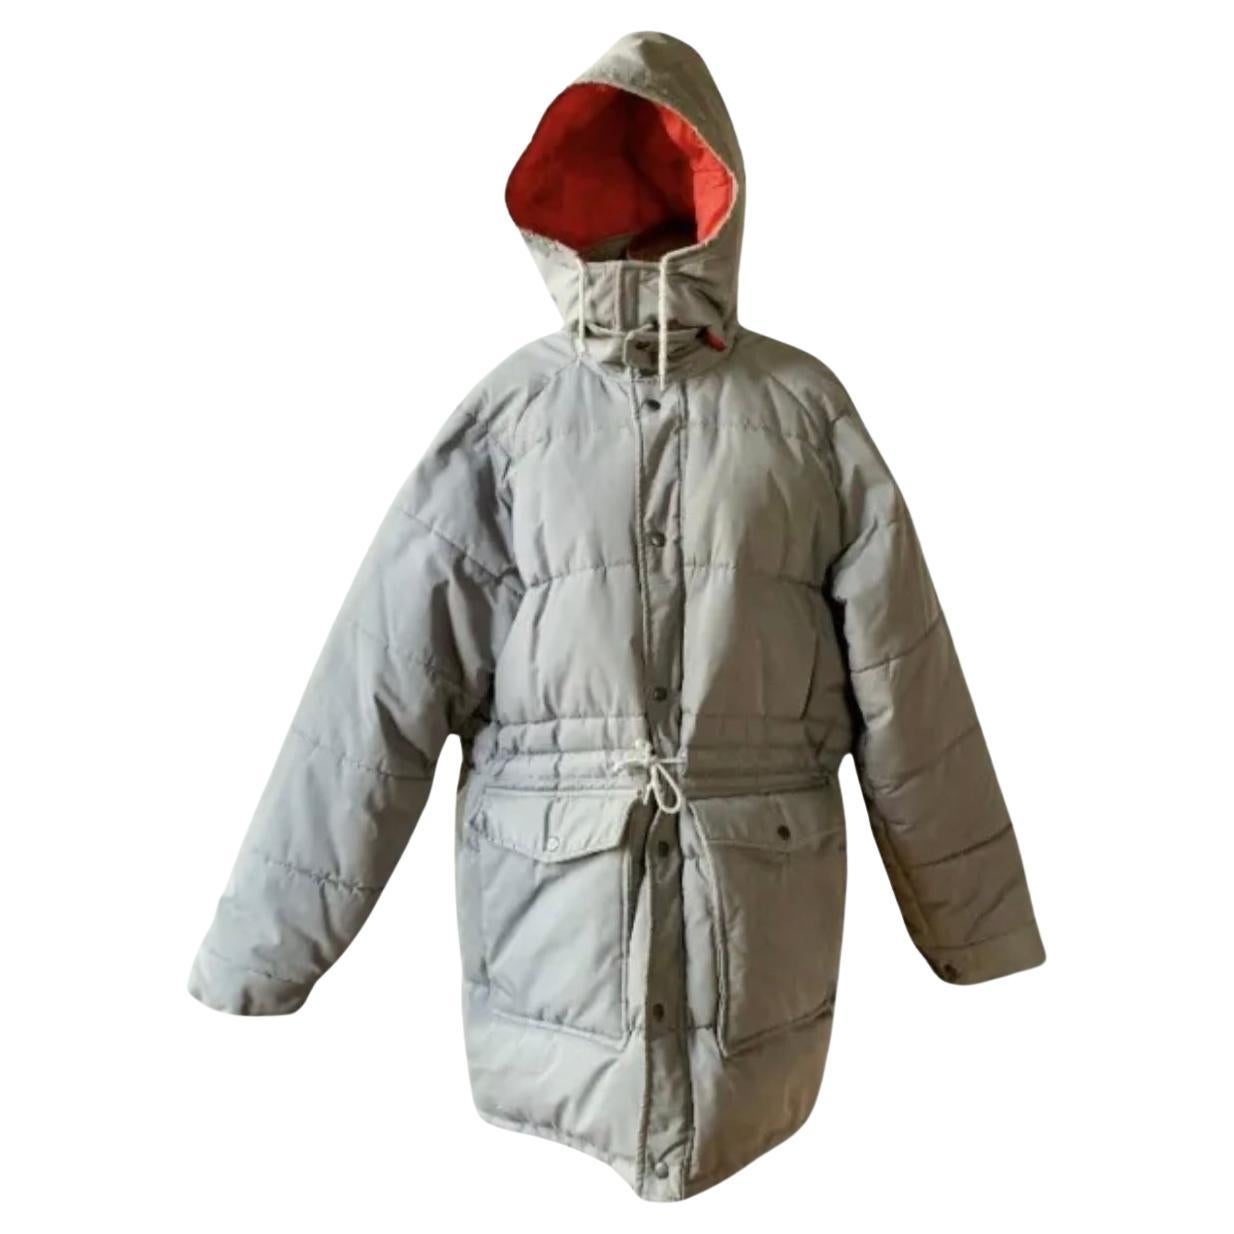 GUY LAROCHE 80s Jupe à capuche PARKA Gray Red Jacket Down Feather Coat XL